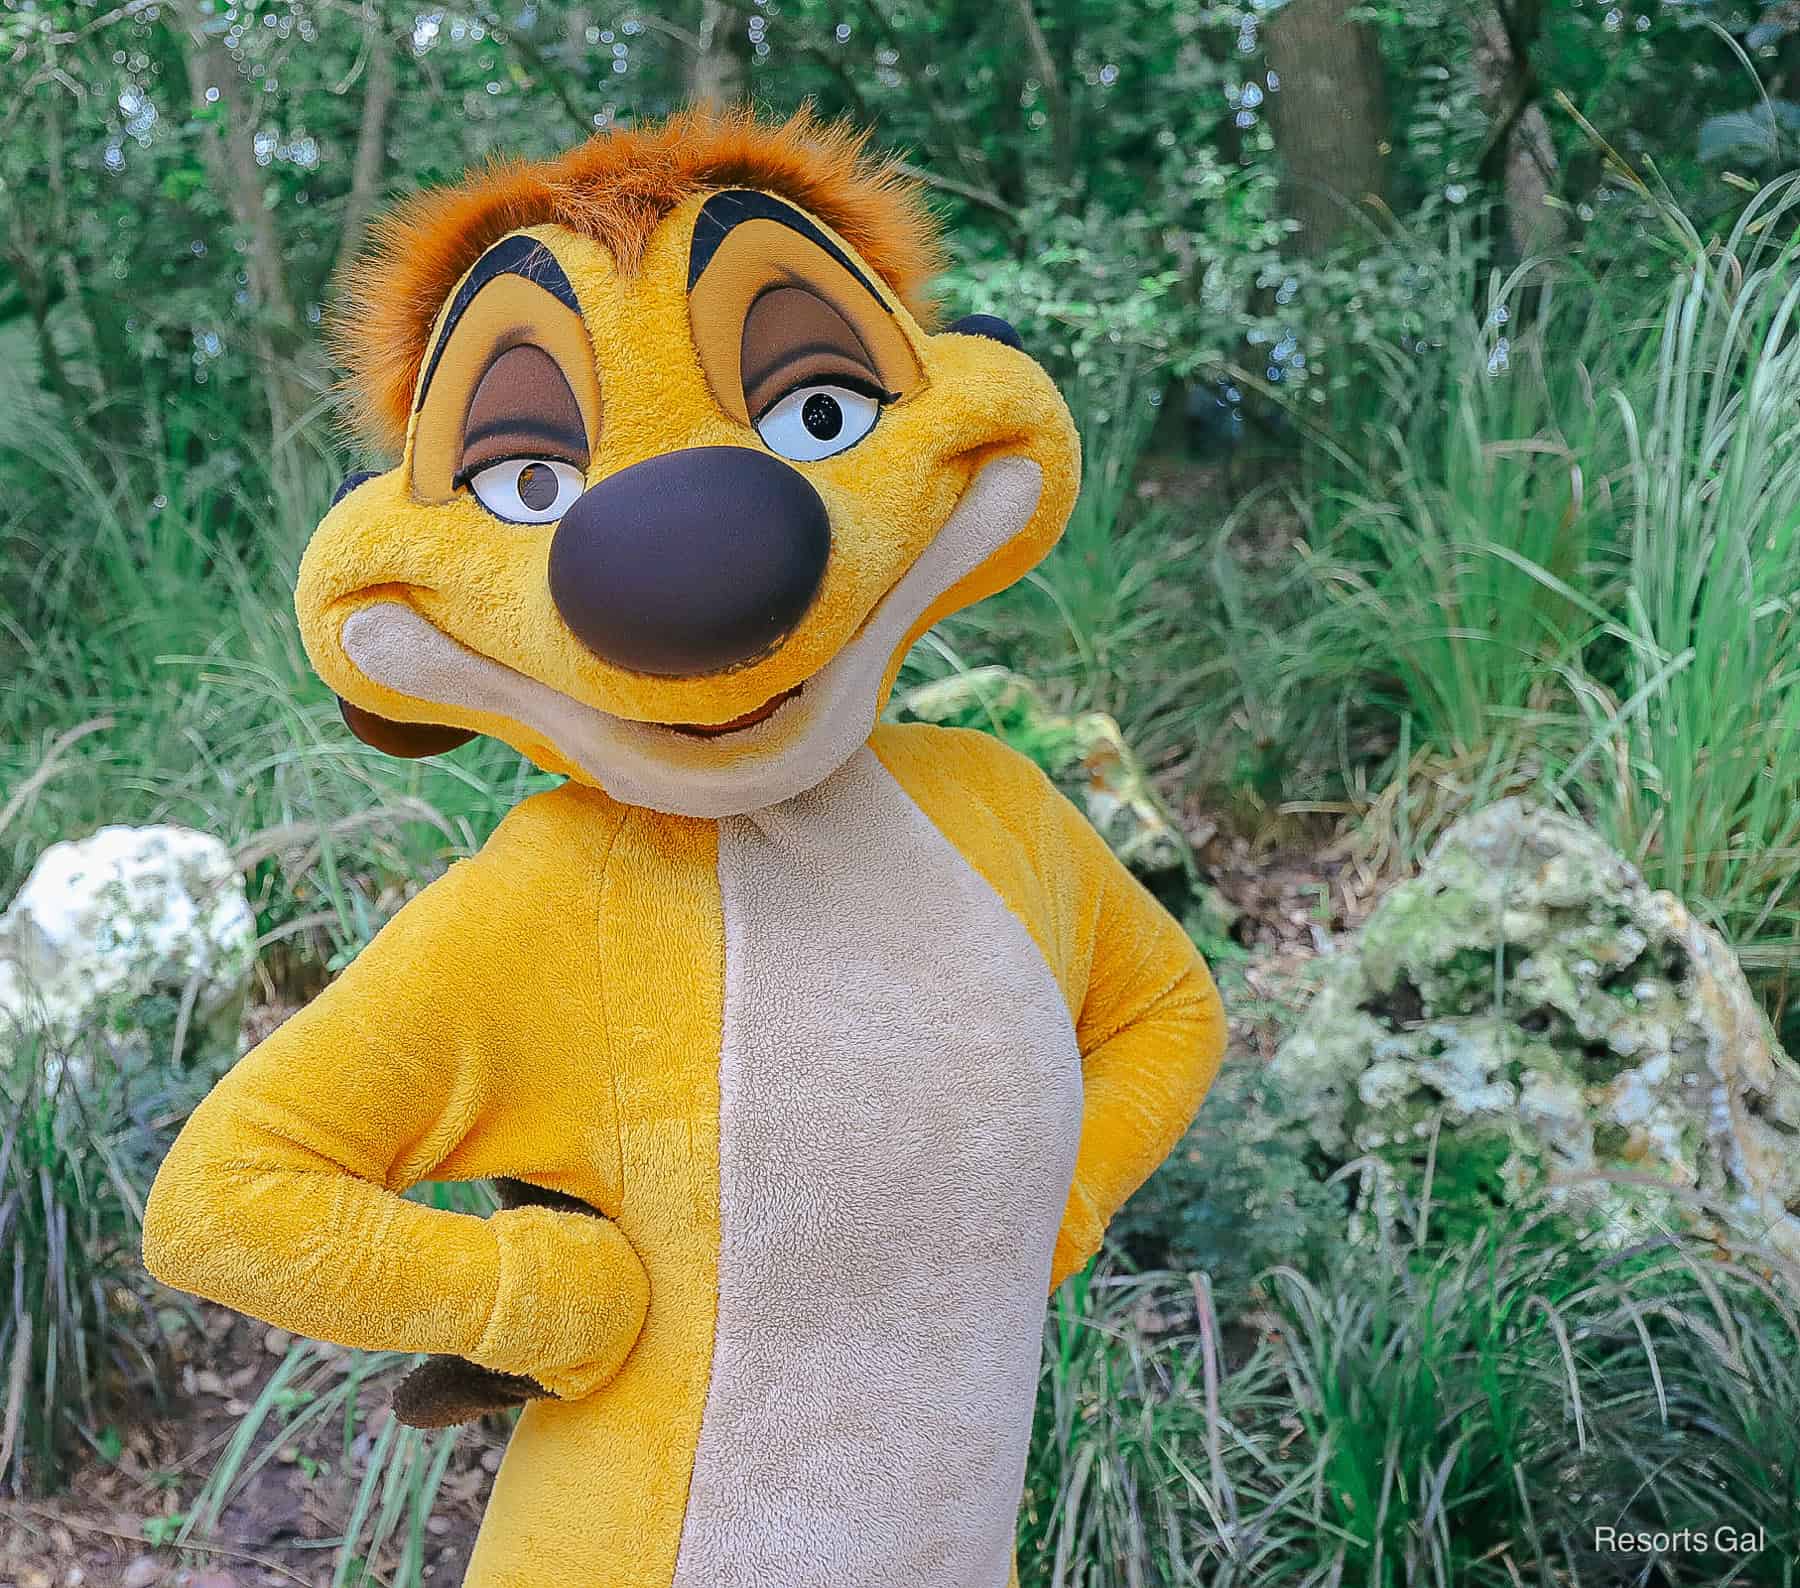 Timon poses with hands on hips 